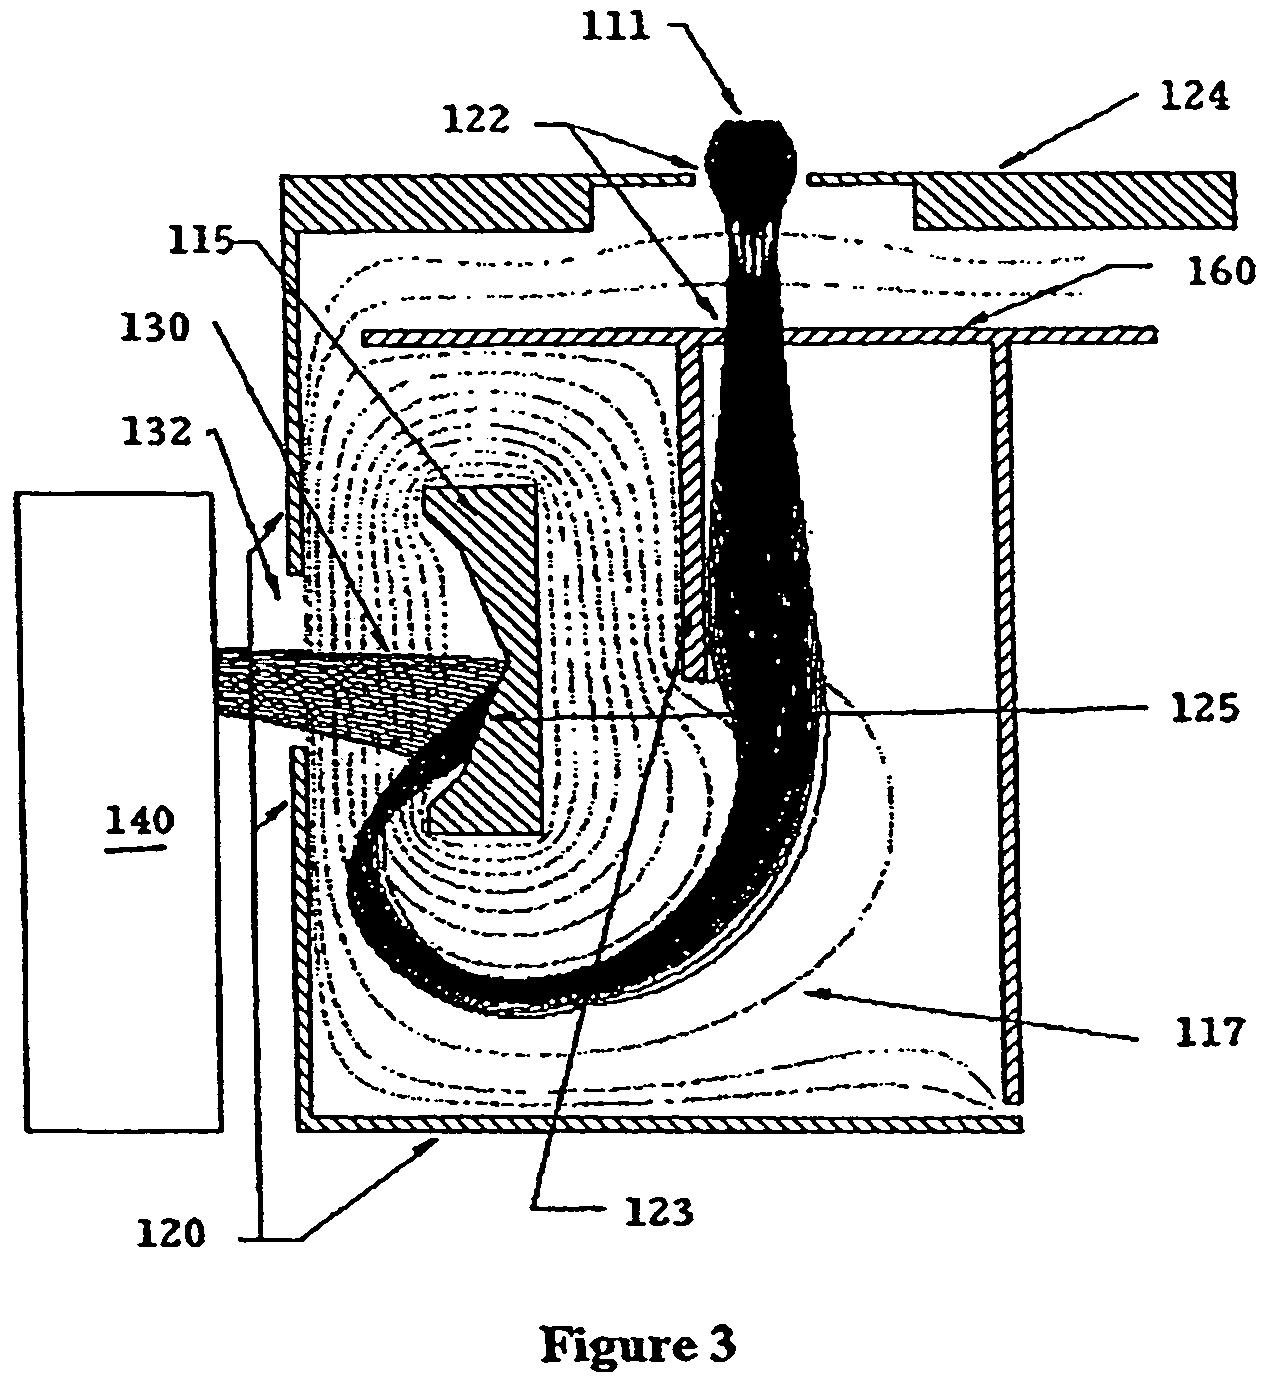 Apparatus for amplifying a stream of charged particles